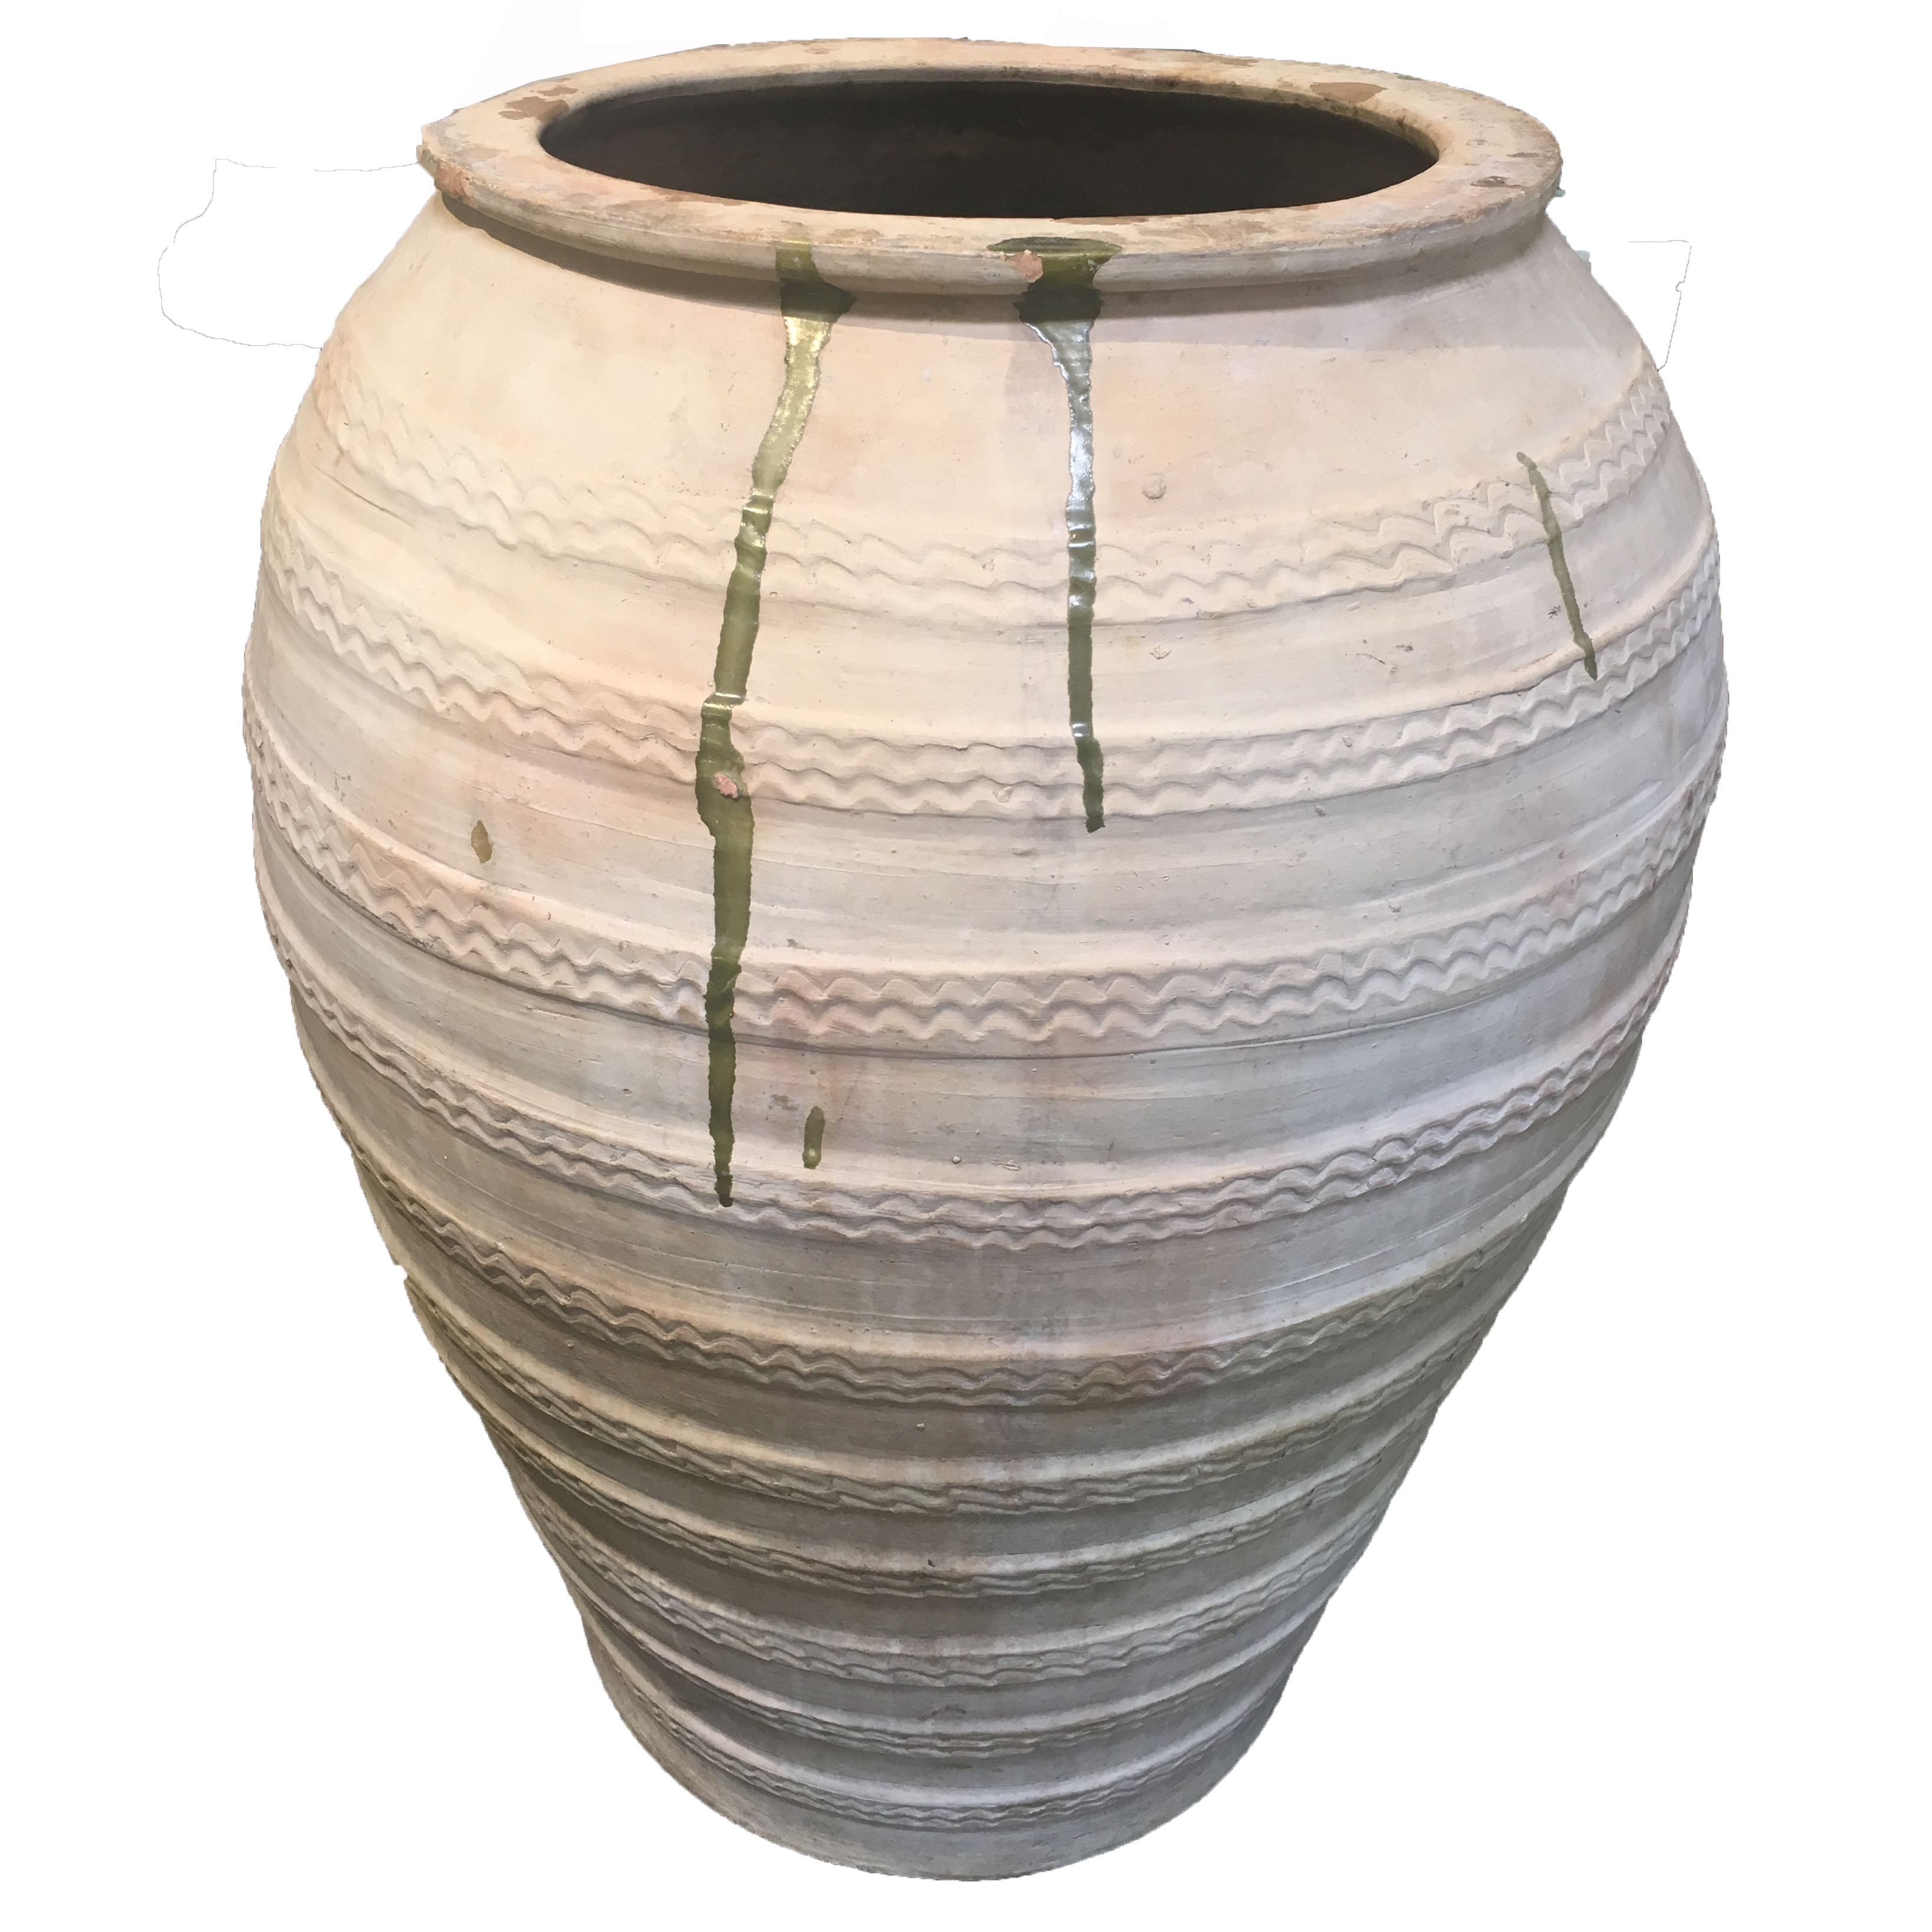 19 Recommended Hand Painted Satsuma Vase 2024 free download hand painted satsuma vase of large urn vase images antiques gifts wonderful large antique pertaining to large urn vase image antique extra spanish ceramic oil jar of large urn vase images an